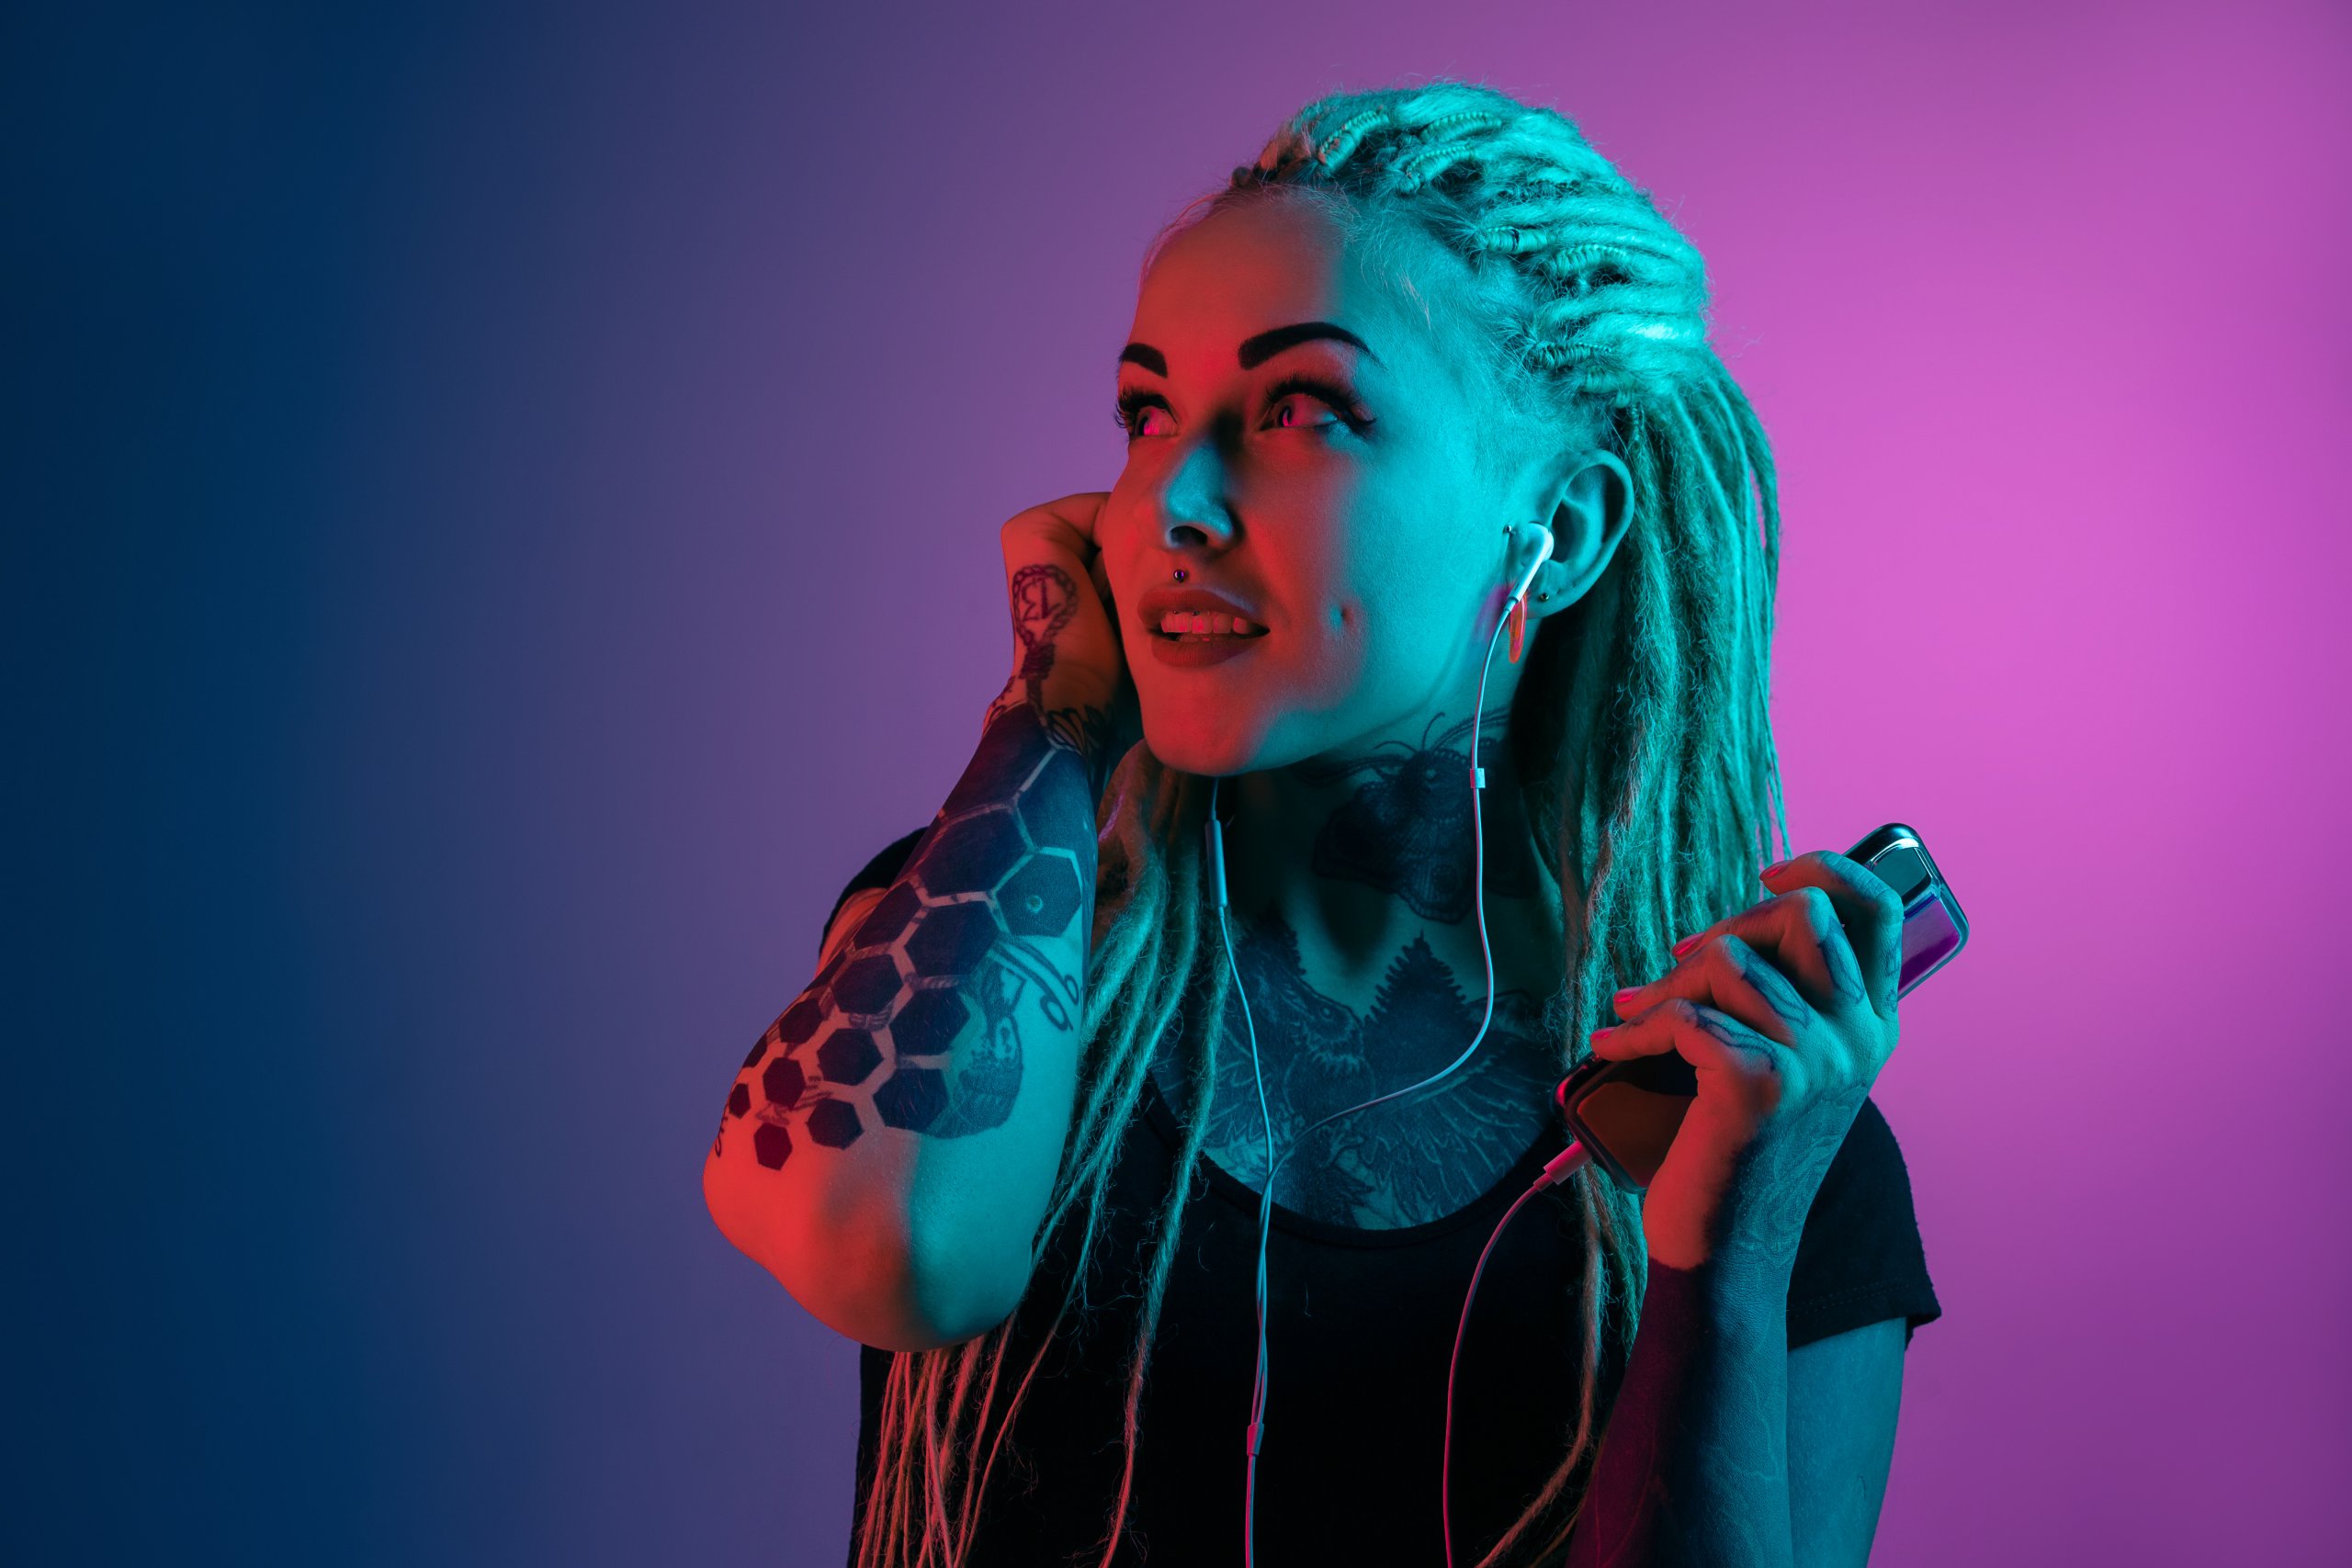 Caucasian young woman's portrait on gradient background in neon light